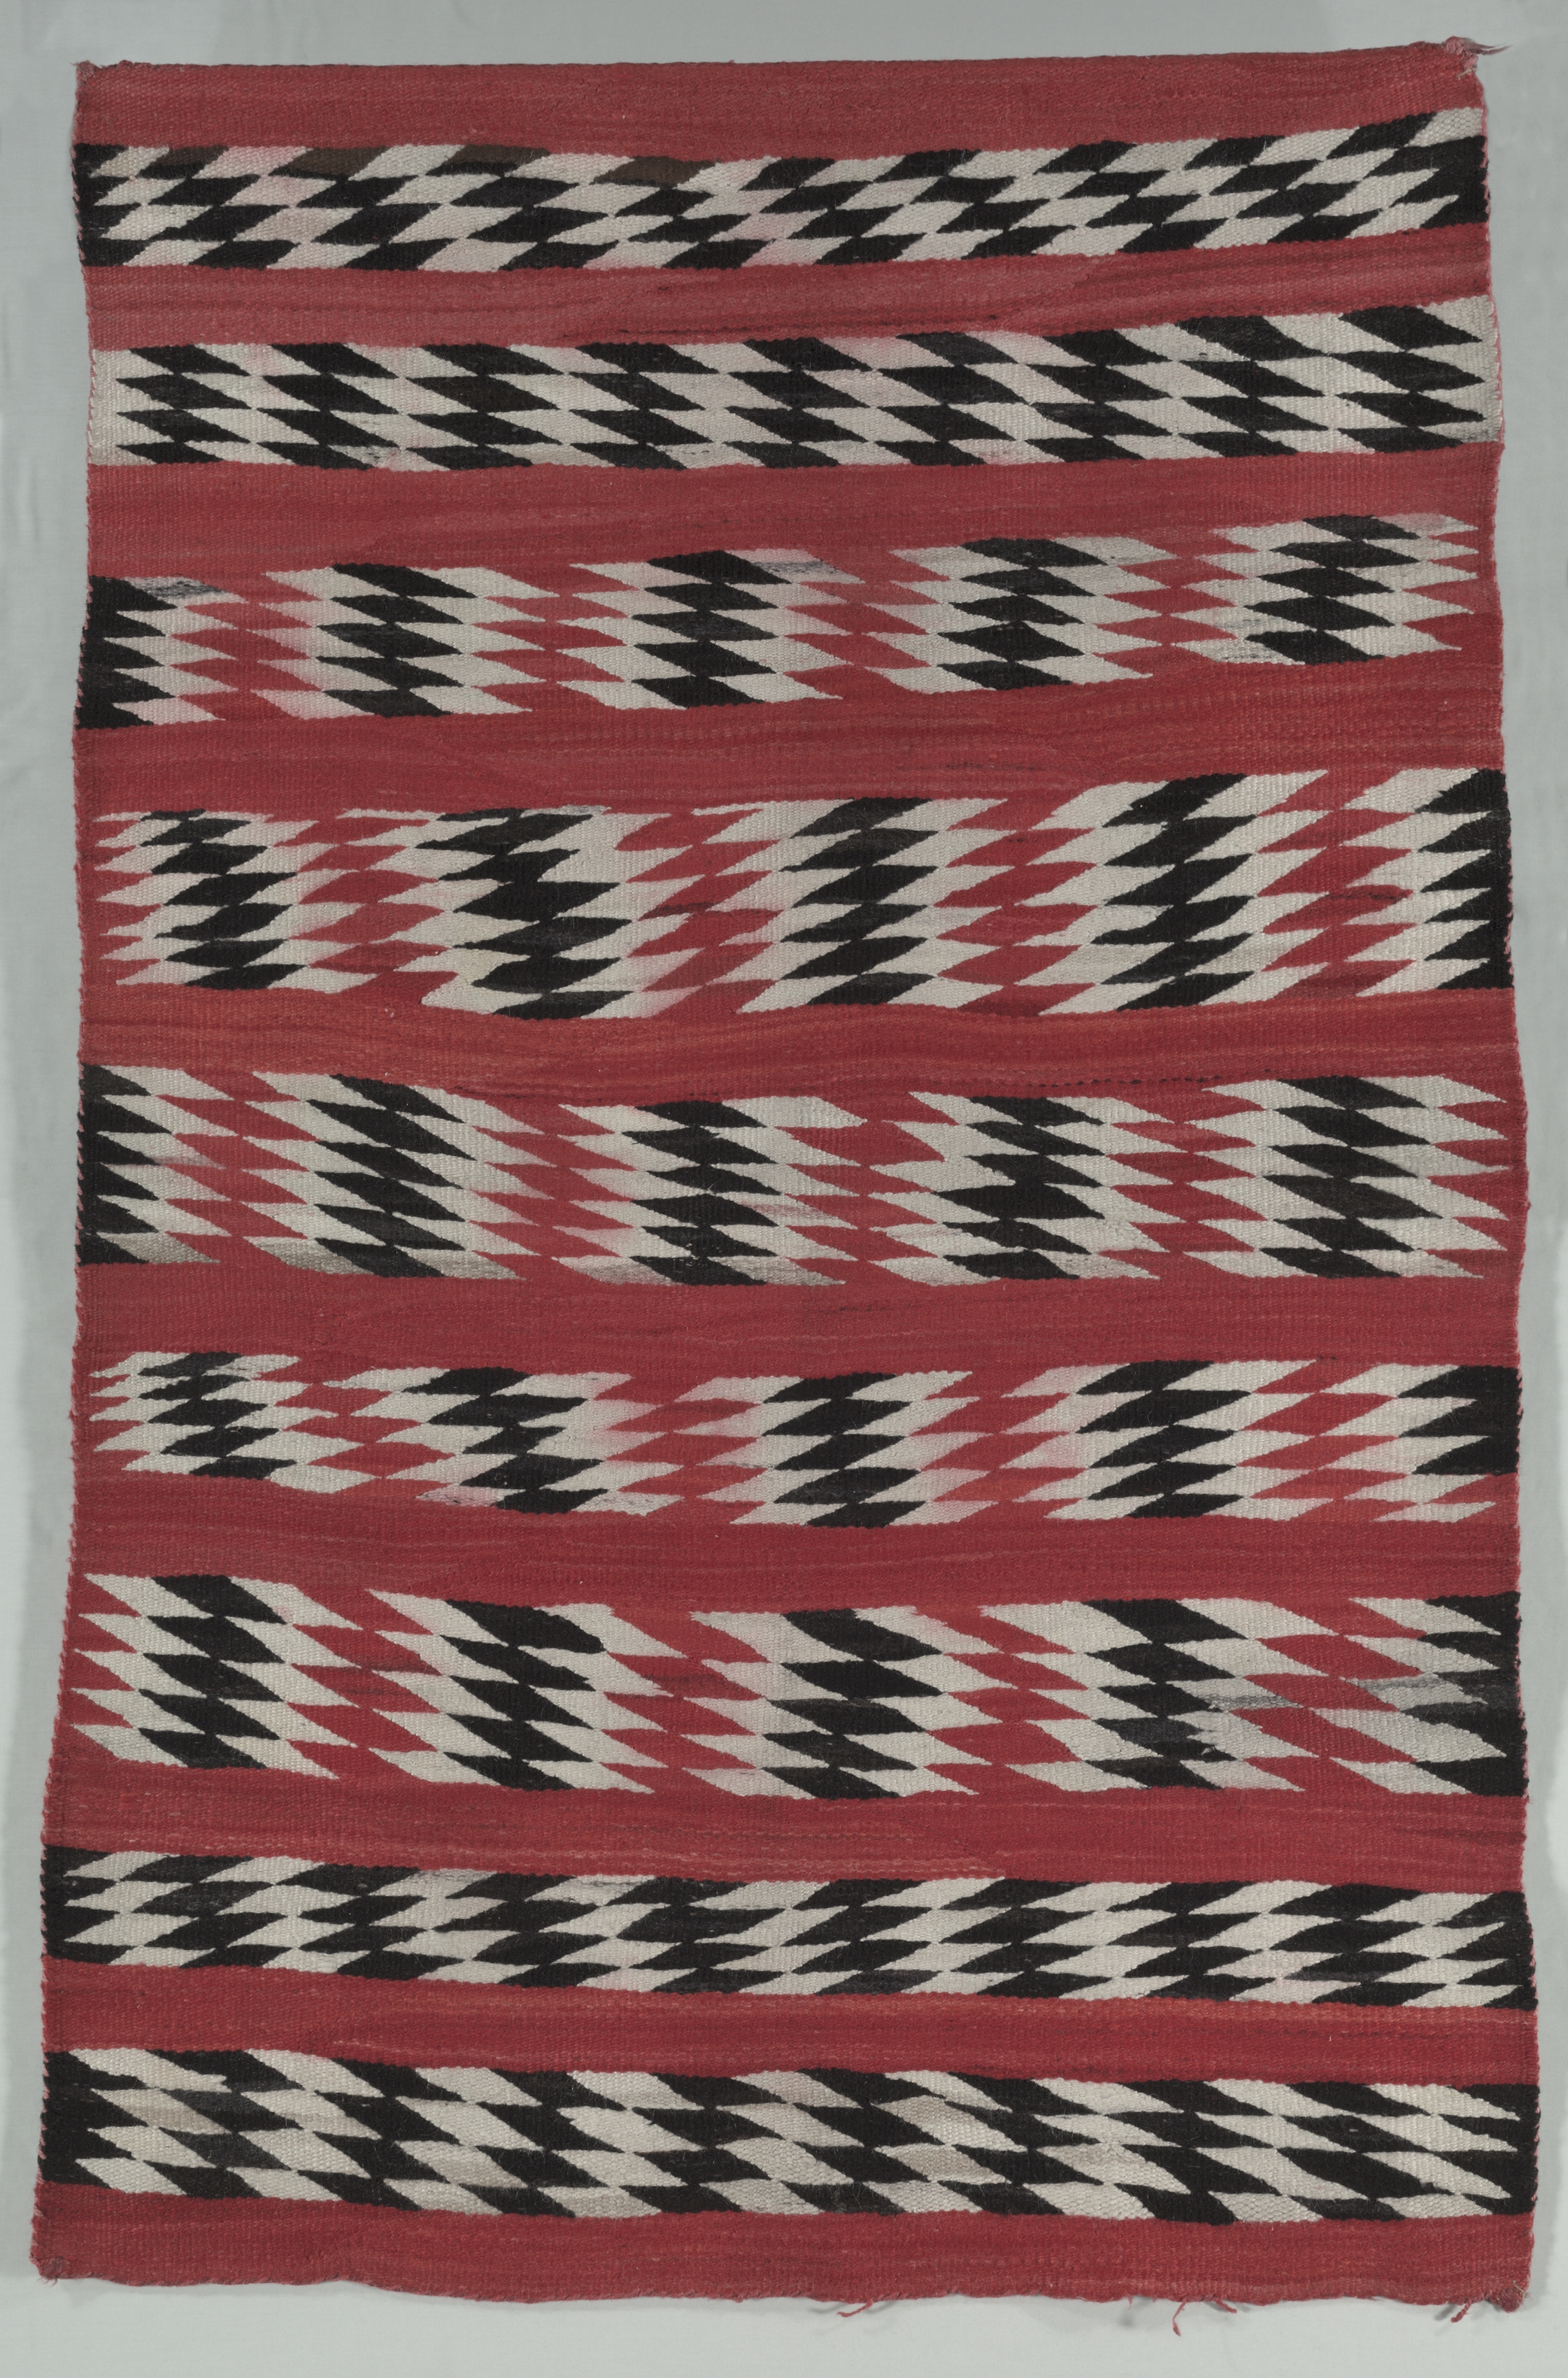 Rug Banded with "diamond stripes"